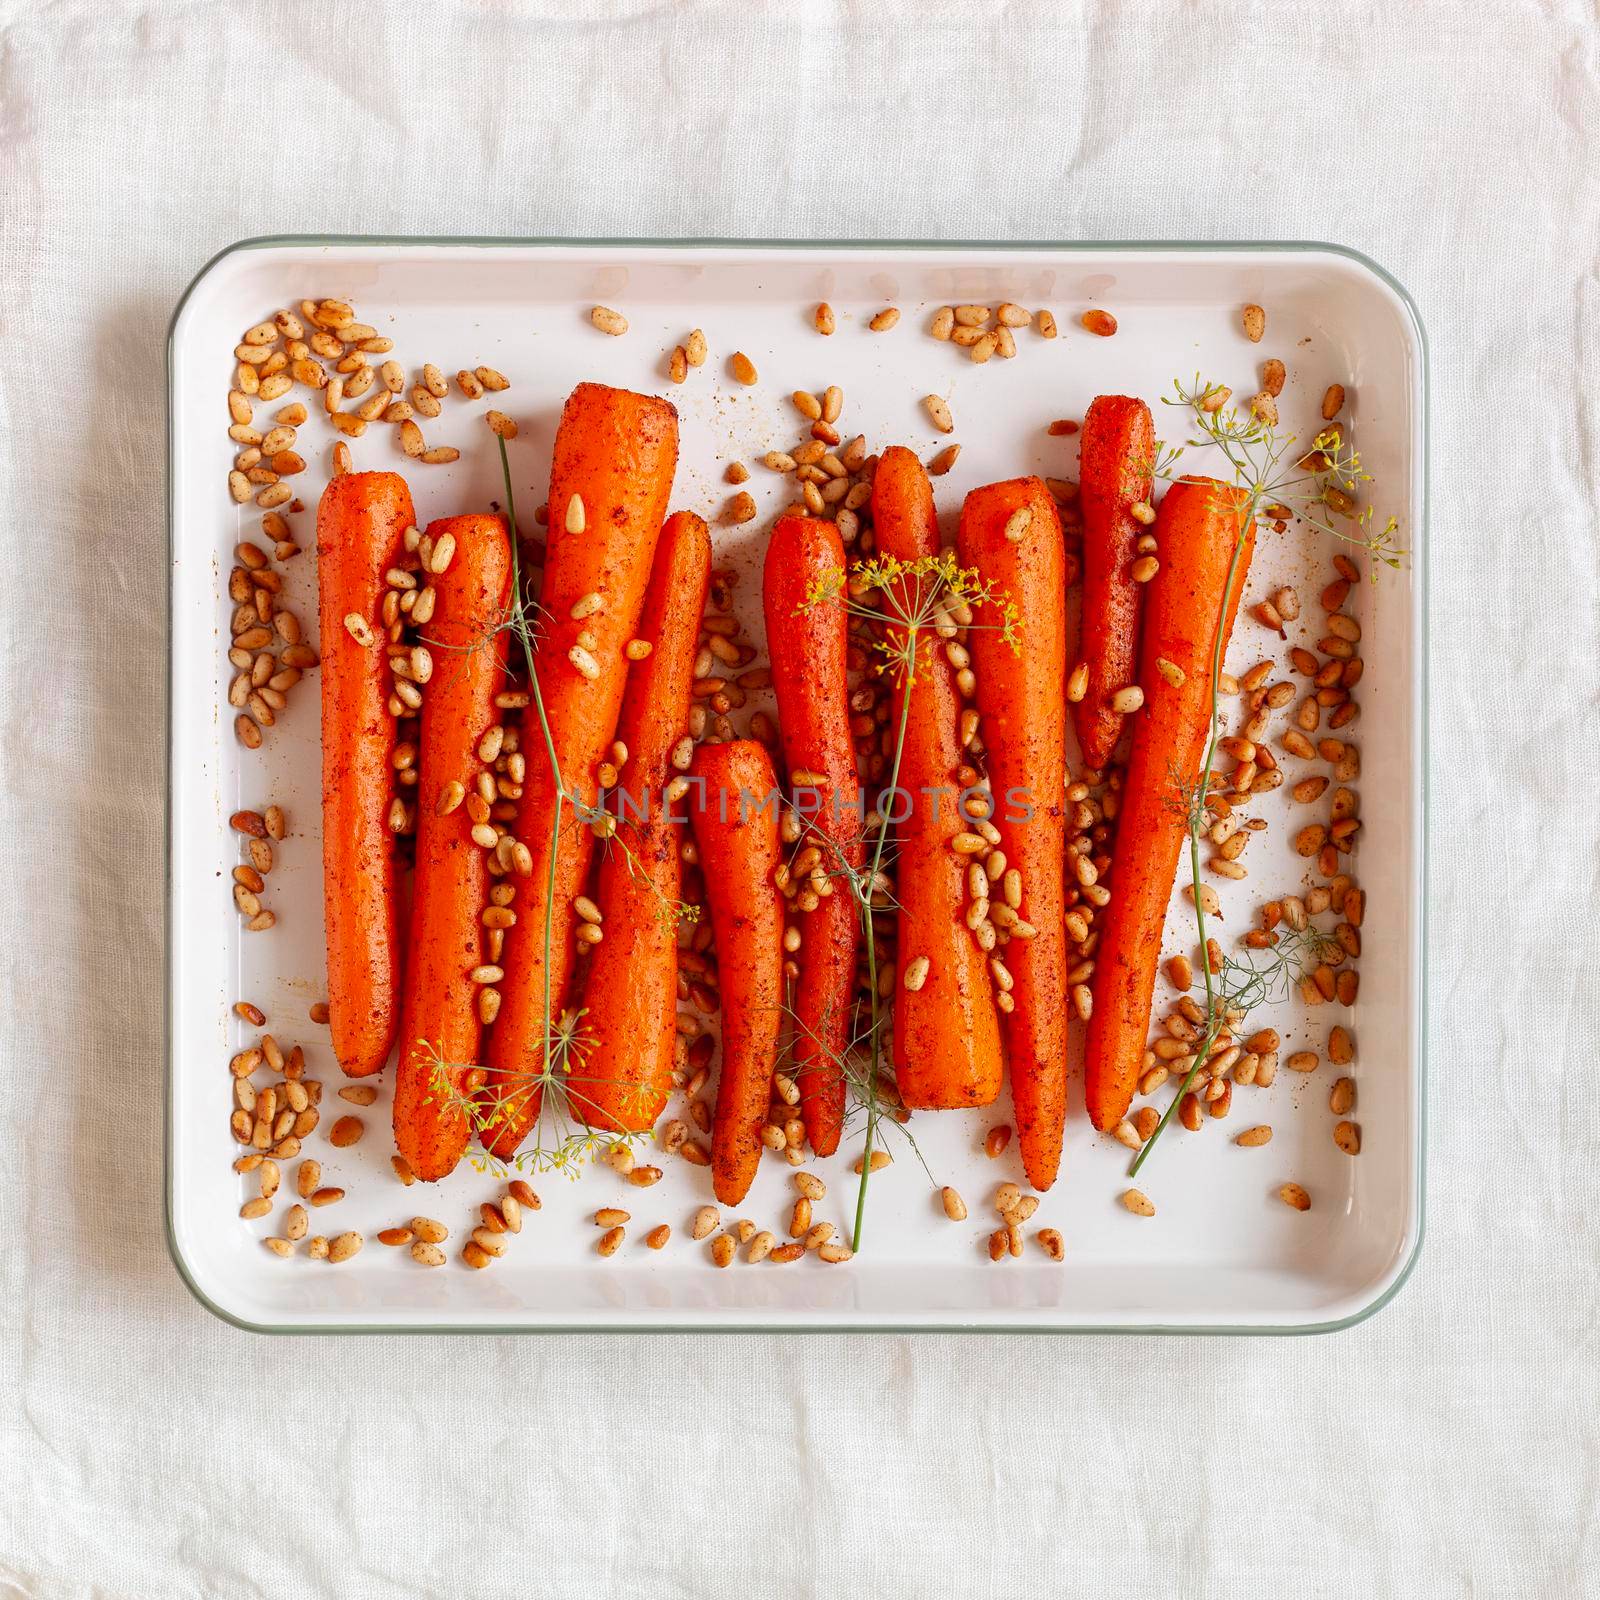 Lebanese-style carrots prepared with pine nuts and cumin and decorated with dill branches, top view